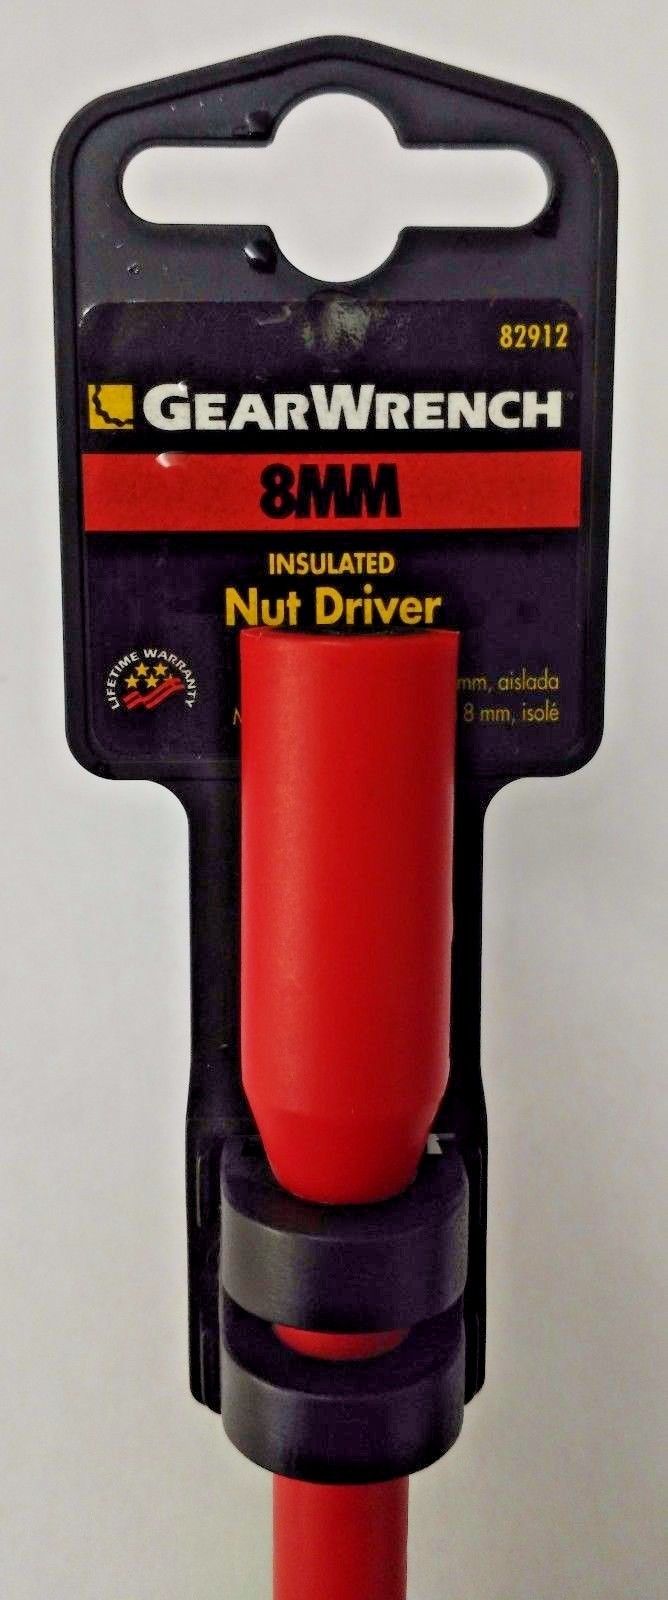 GearWrench 82912 8MM Insulated Nutdriver